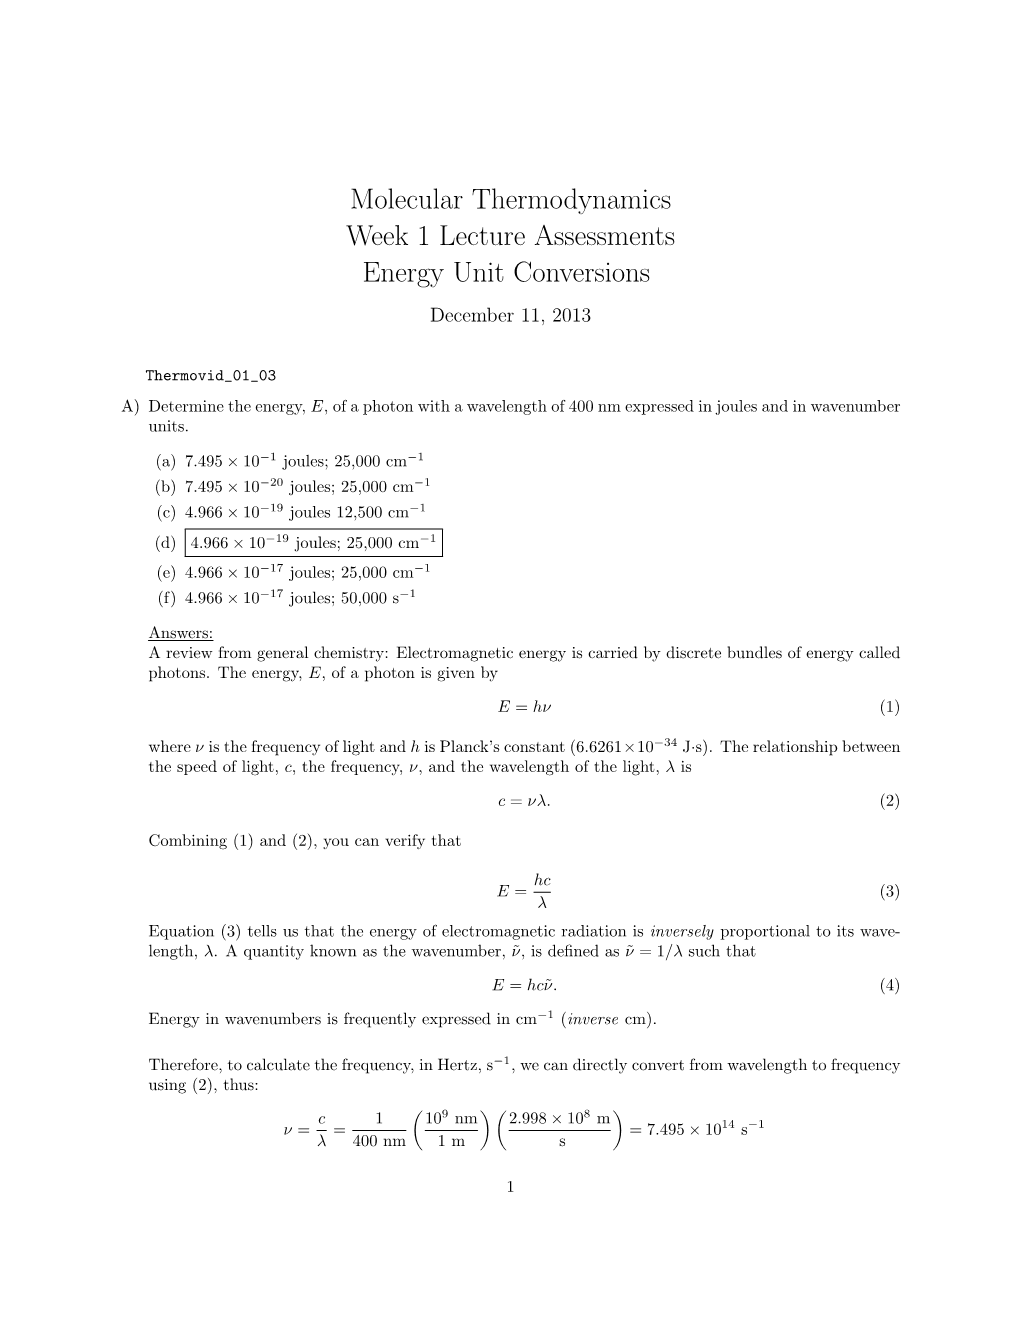 Molecular Thermodynamics Week 1 Lecture Assessments Energy Unit Conversions December 11, 2013